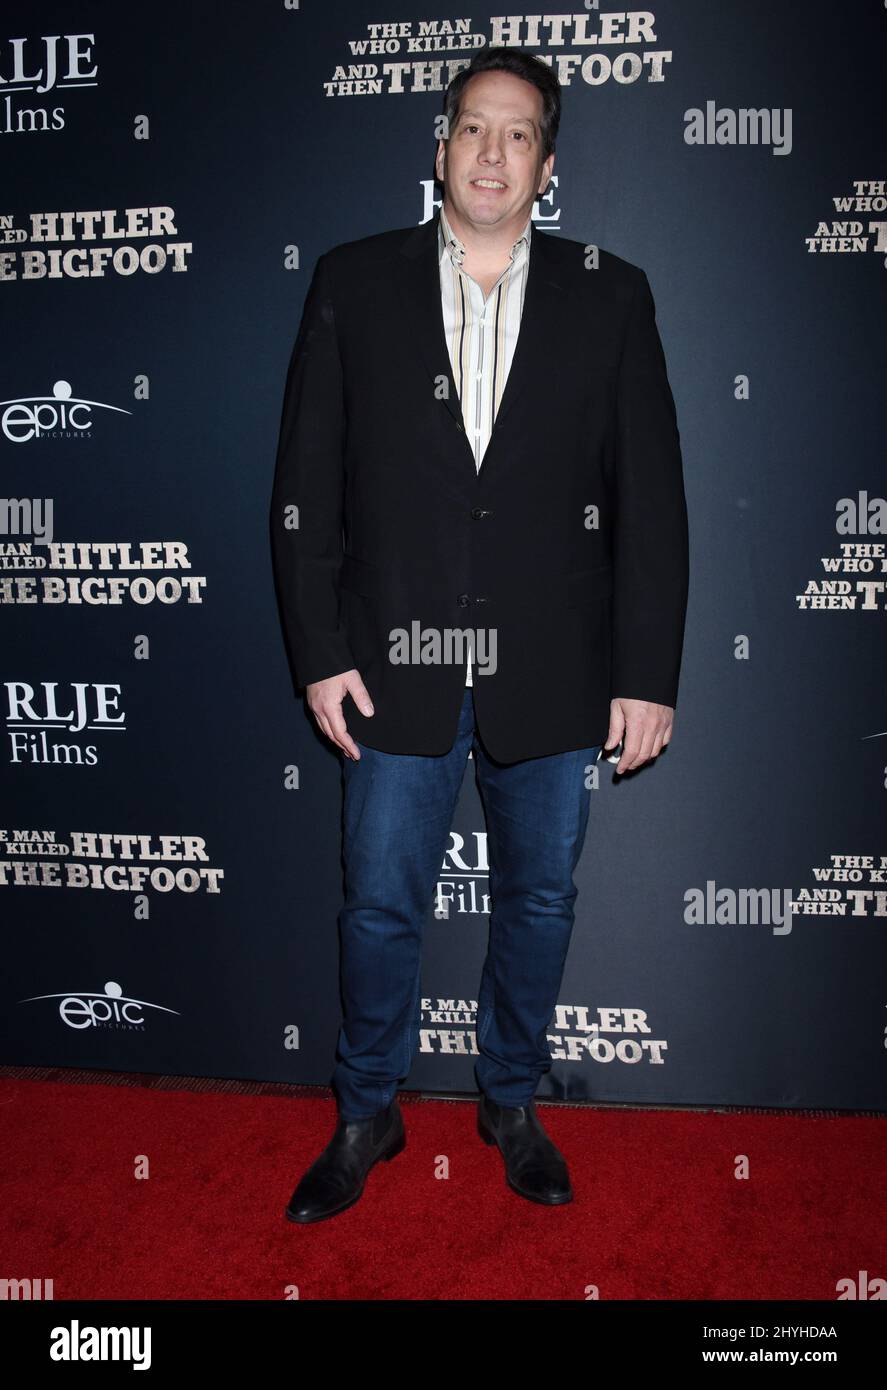 Patrick Ewald bei „The man Who Killed Hitler and Then The Bigfoot“ in Los Angeles Premiere im ArcLight Cinemas Hollywood am 4. Februar 2019 in Hollywood, ca. Stockfoto